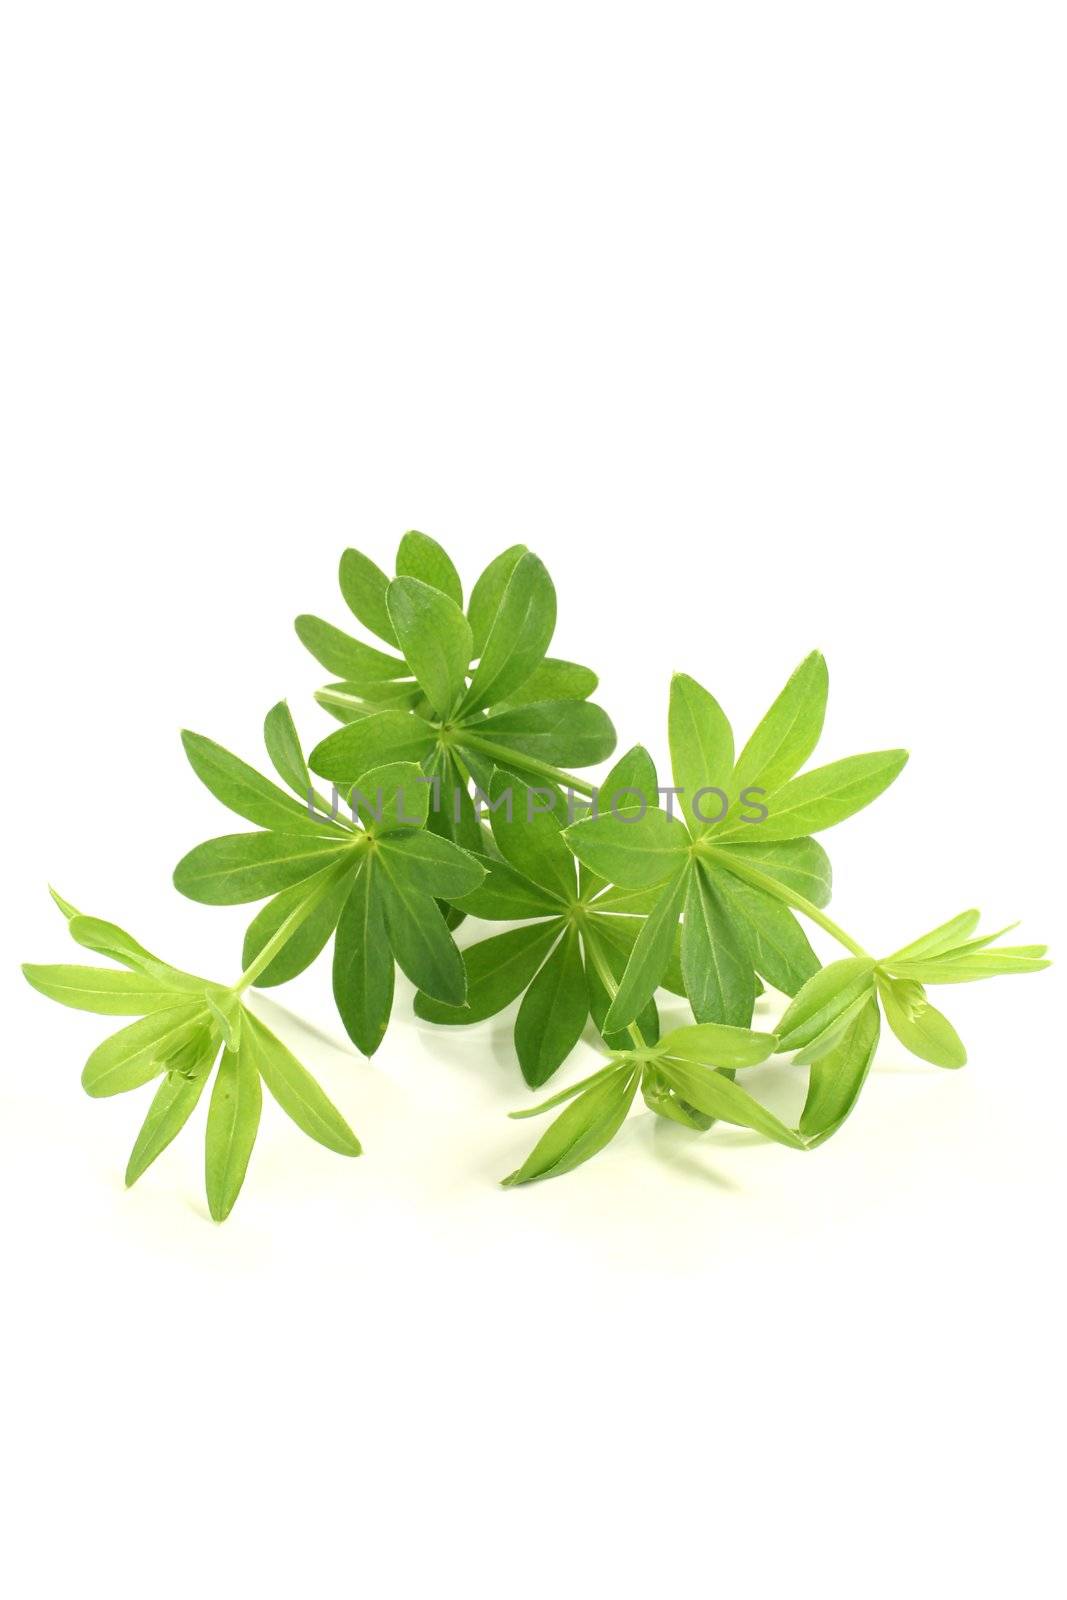 fresh green sweet woodruff with leaves on a light background